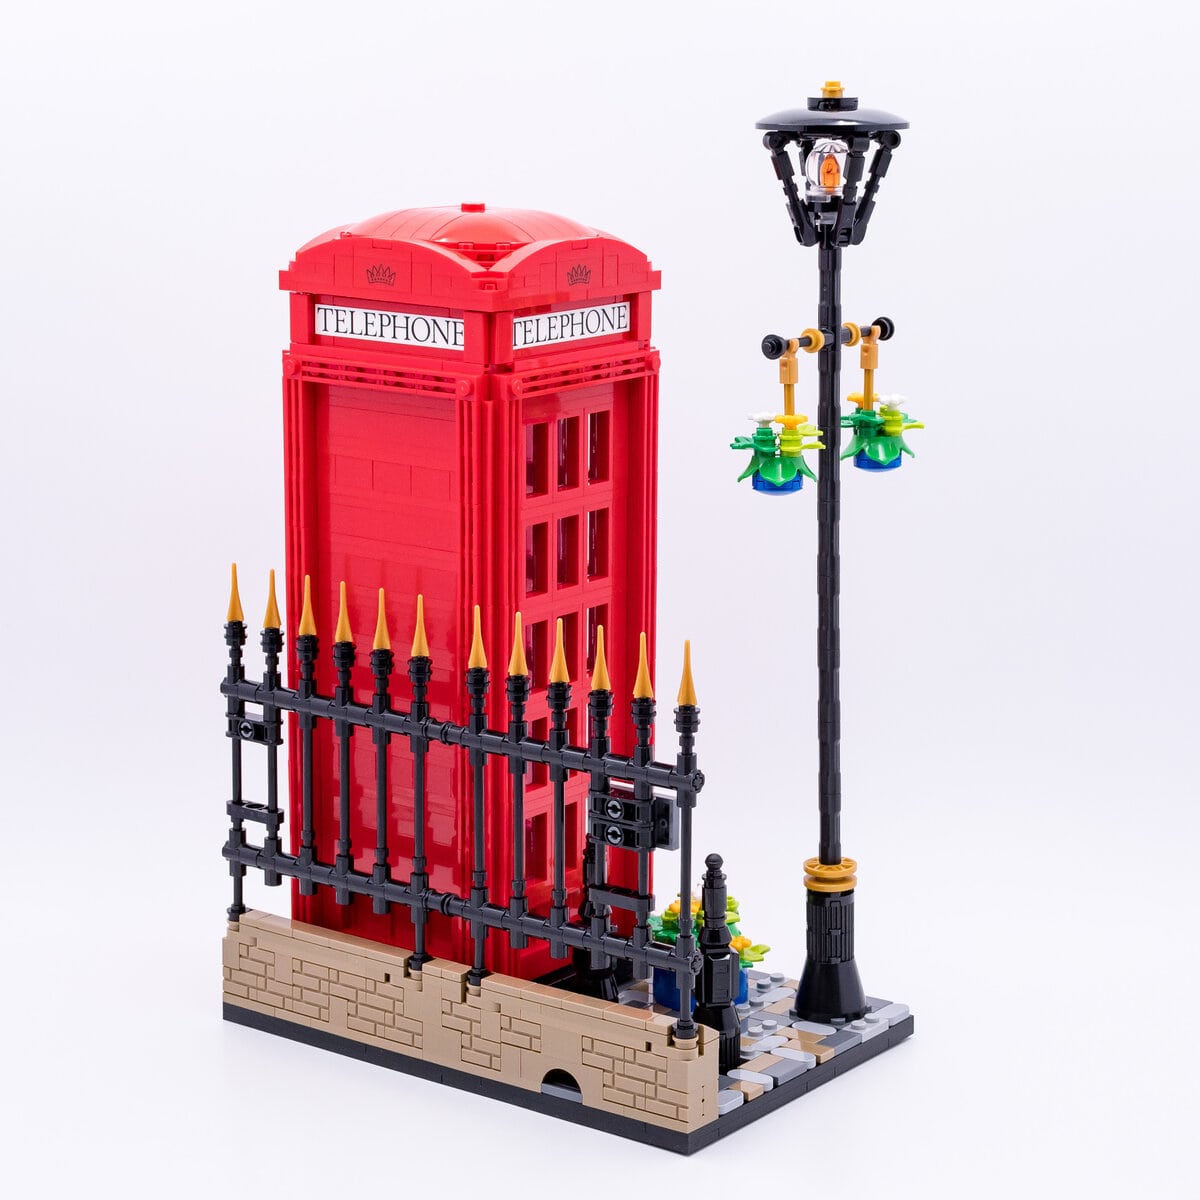 LEGO Ideas 21347 Red London Telephone Box : l'annonce officielle